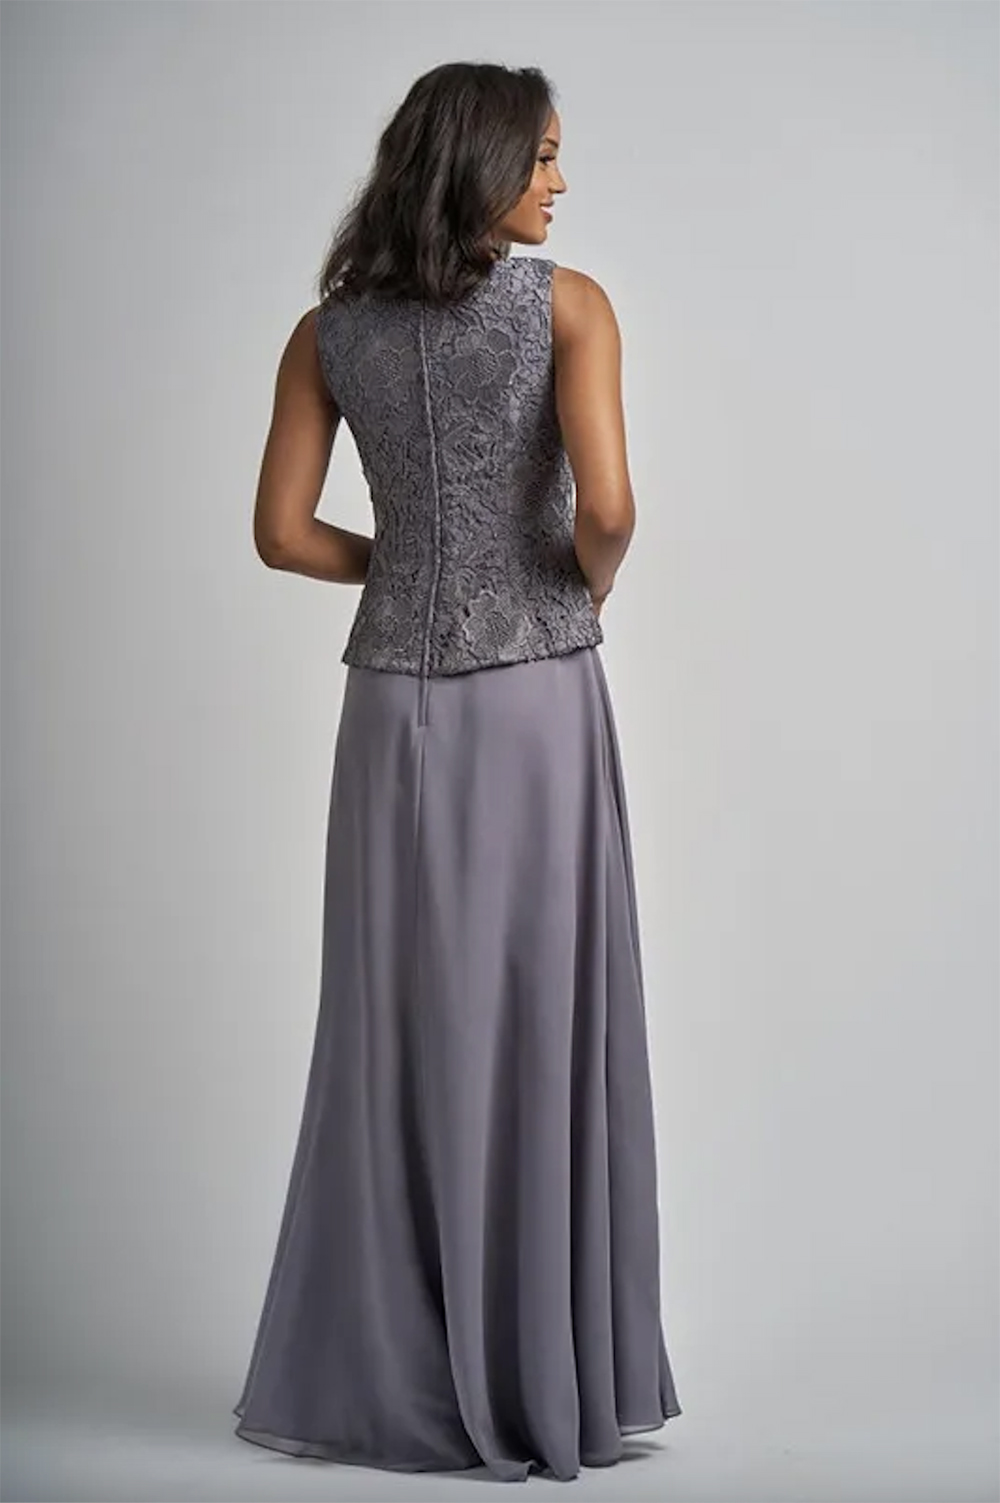 Silver Gray Lace Chiffon Mother Of the Bride Dresses with Long Sleeve Jacket Plus Size Women Three Pieces Evening Formal Gown